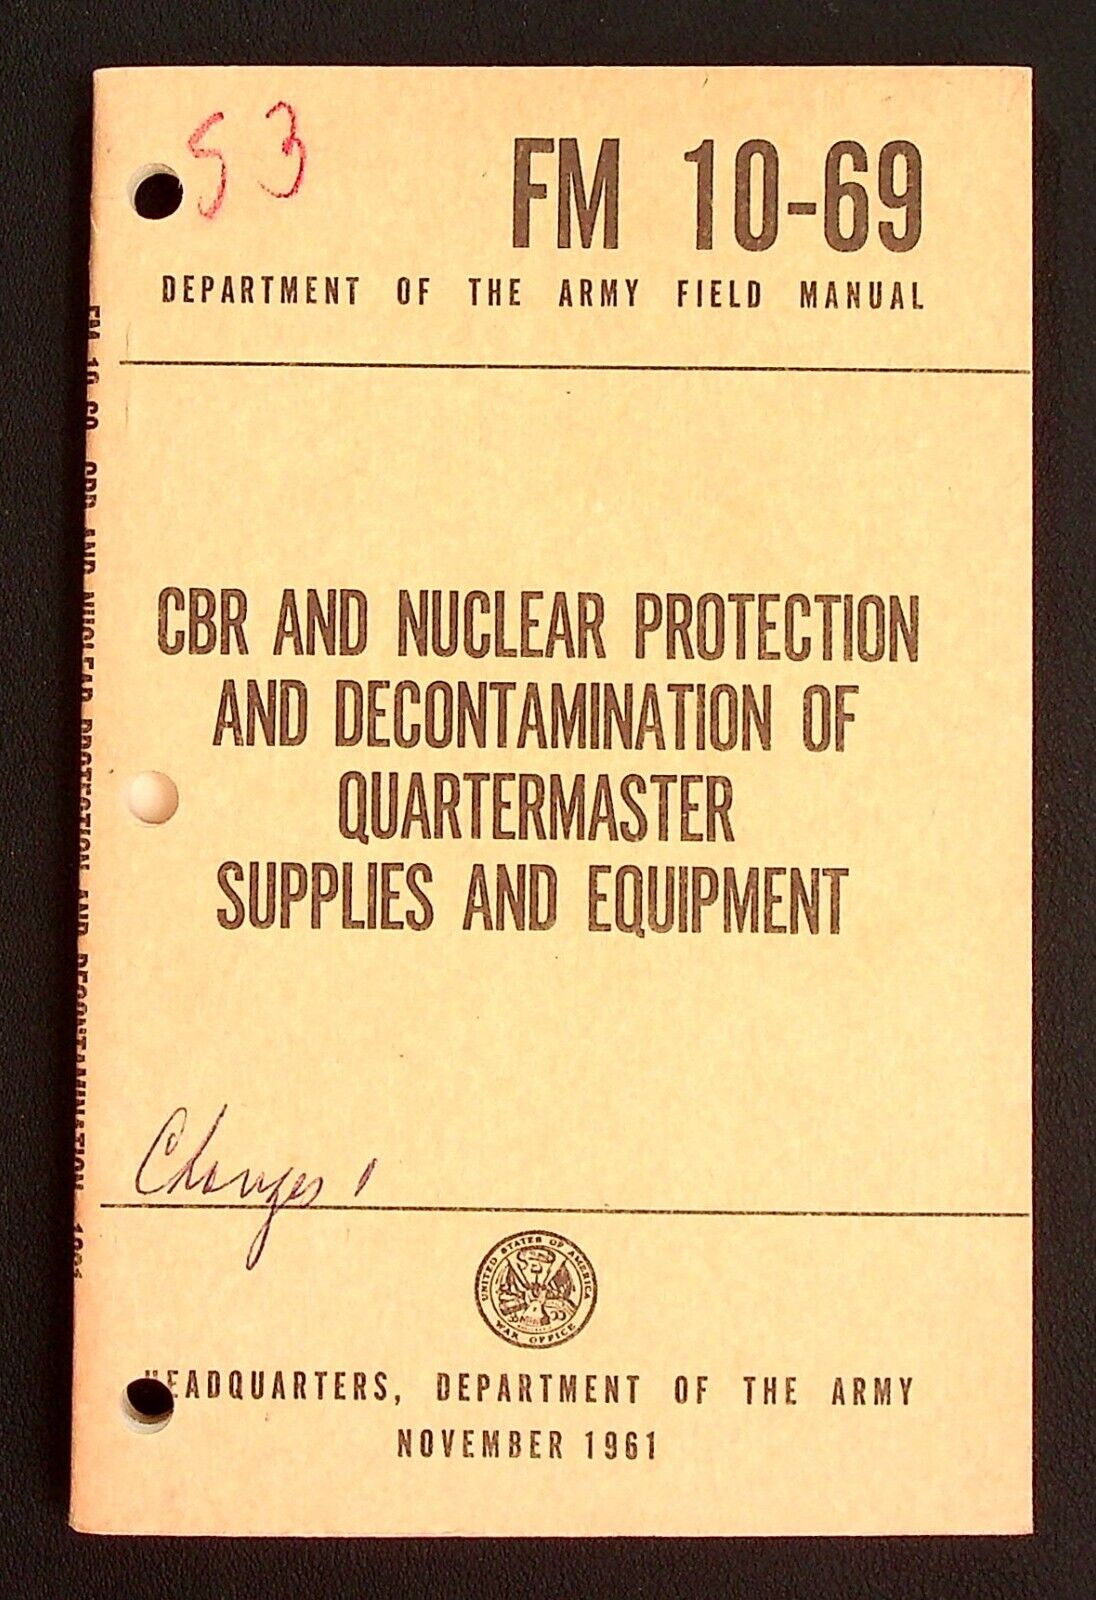 US Army Field FM 10-69 CBR Nuclear Protection Supplies 1961 Training Paper Book